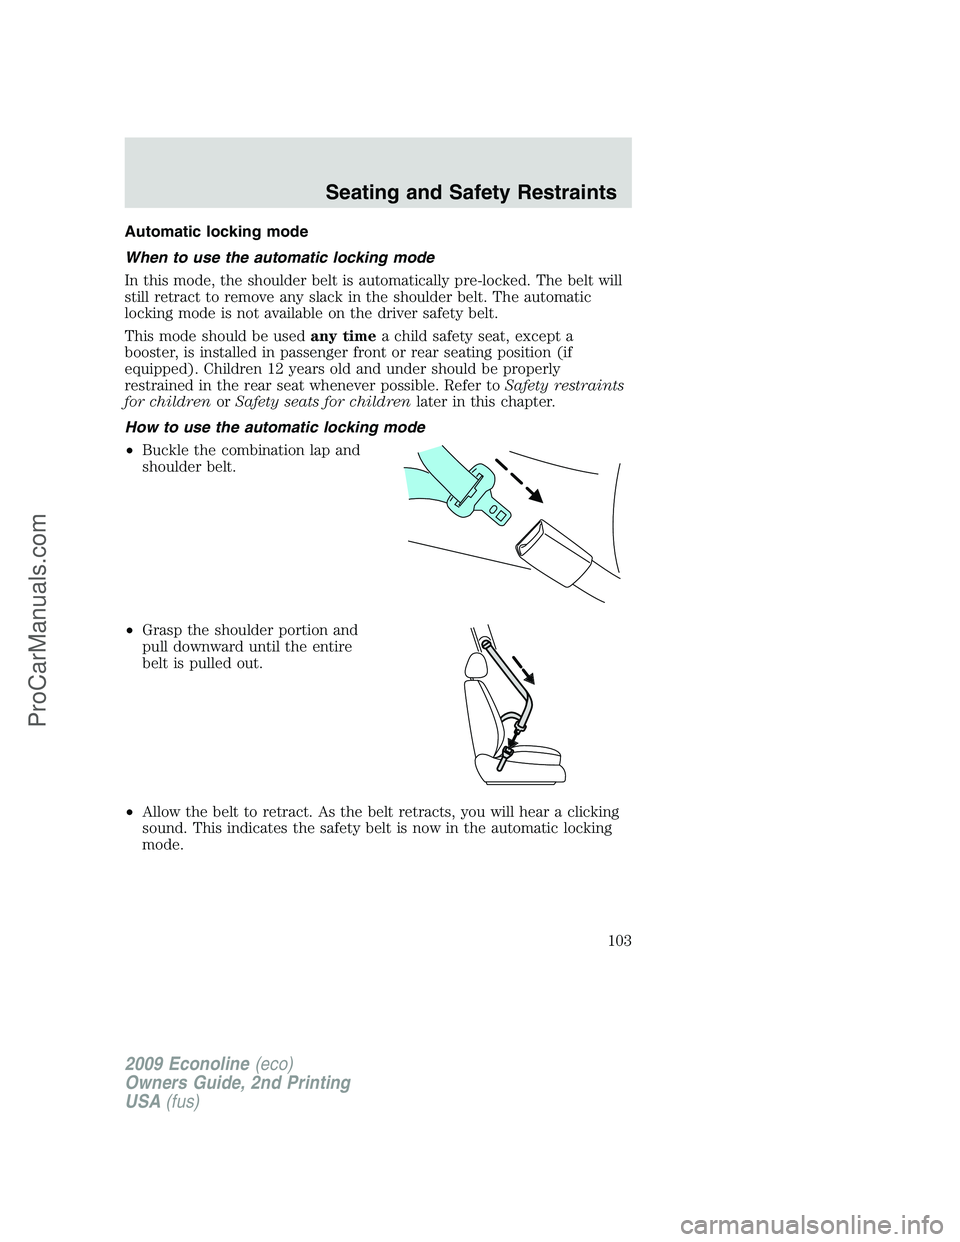 FORD ECONOLINE 2009  Owners Manual Automatic locking mode
When to use the automatic locking mode
In this mode, the shoulder belt is automatically pre-locked. The belt will
still retract to remove any slack in the shoulder belt. The aut